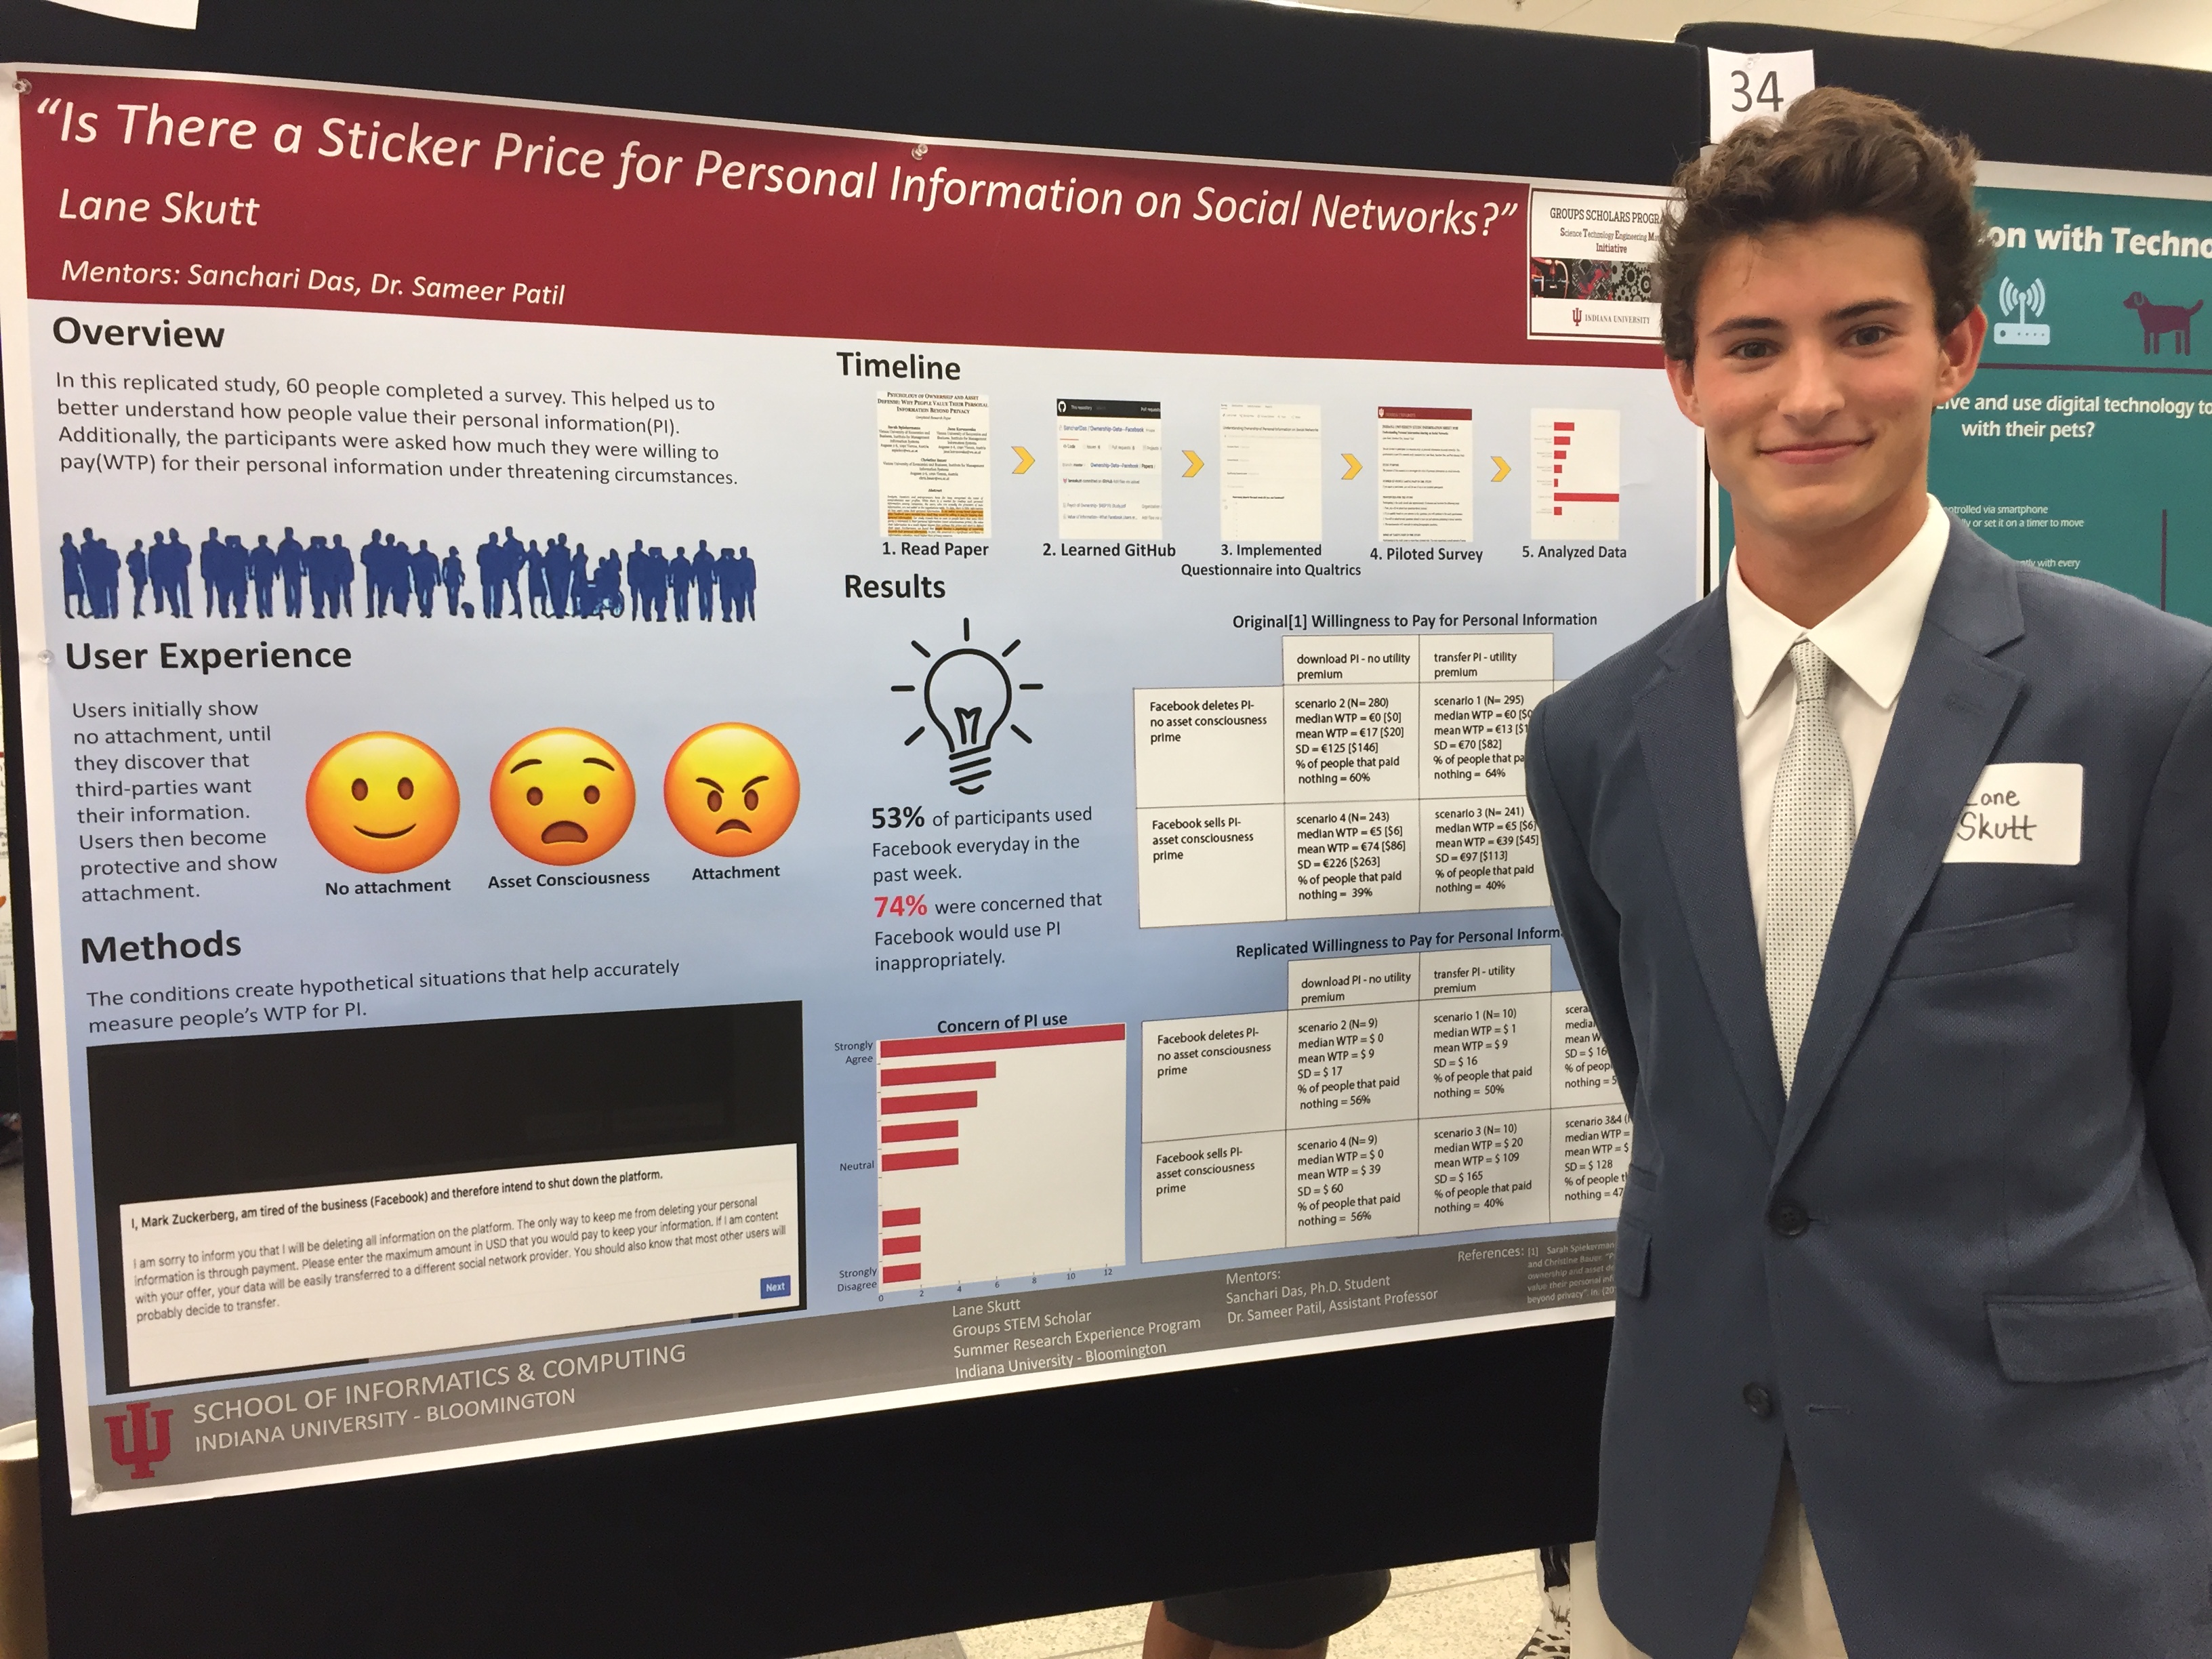 Lane Skutt Summer Researcher with their research image